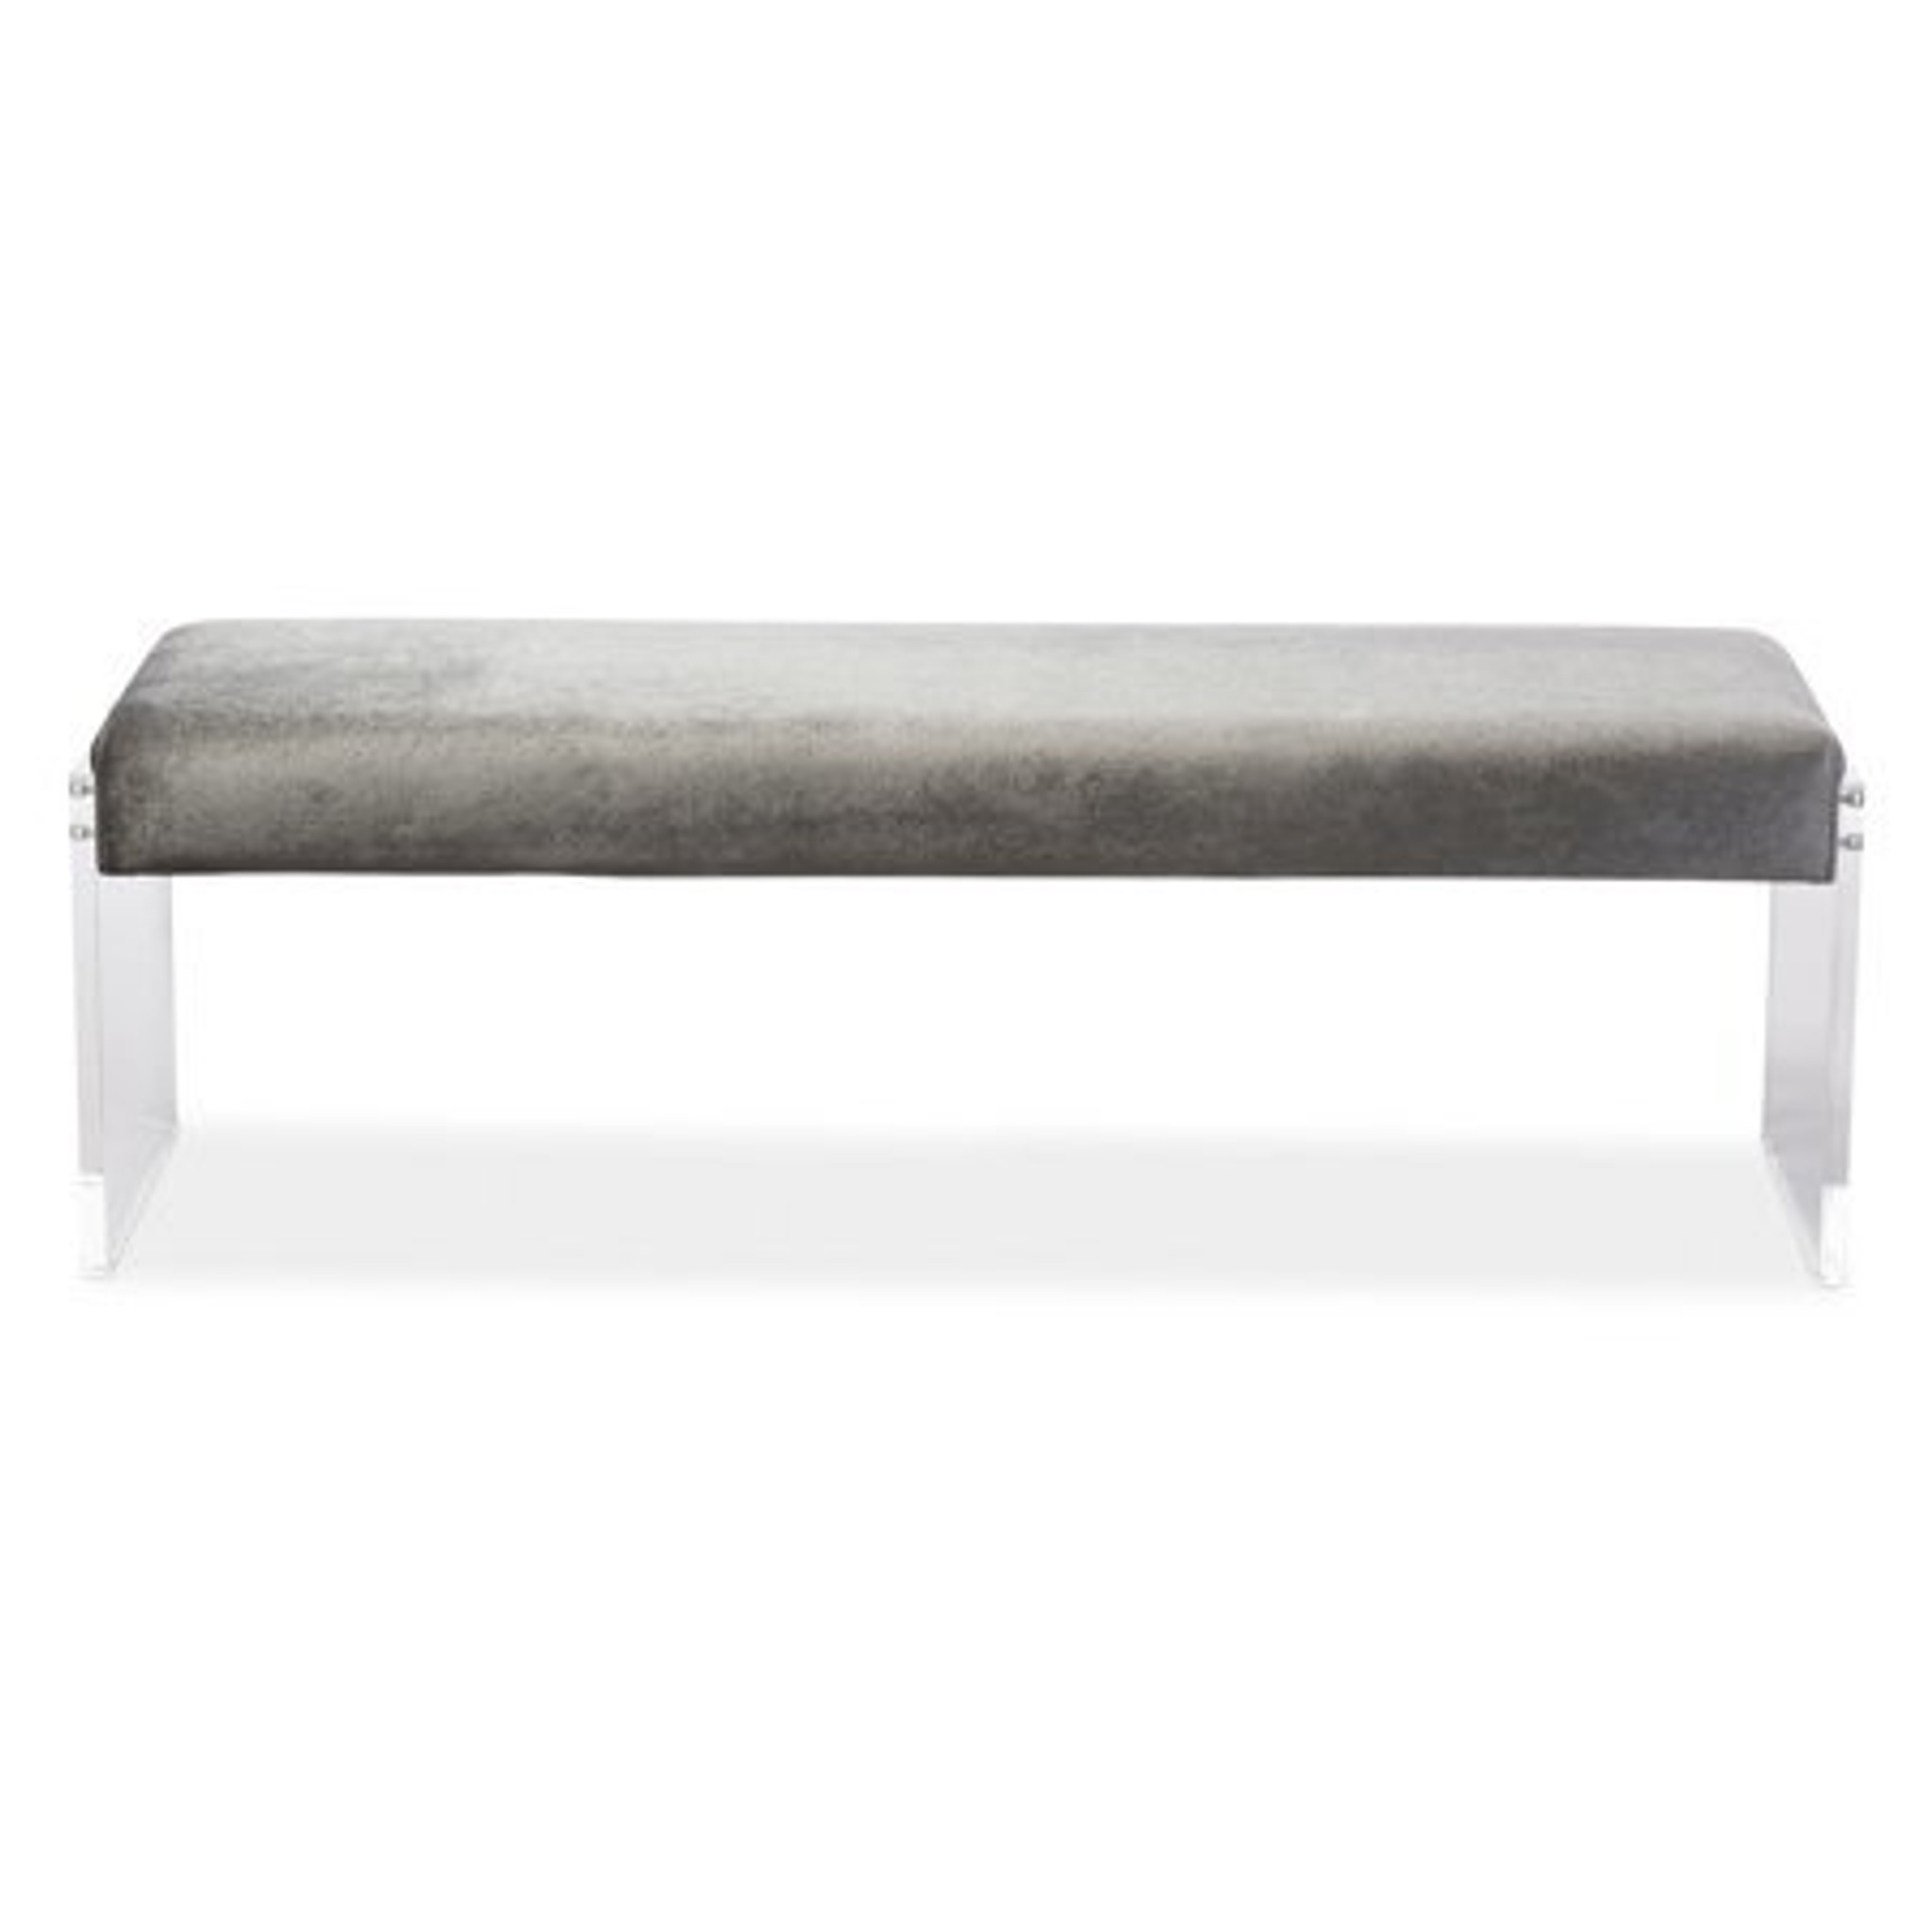 Baxton Studio Hildon Upholstered Lux Bench  clear acrylic bench seat with grey velvet microfiber baxton studio